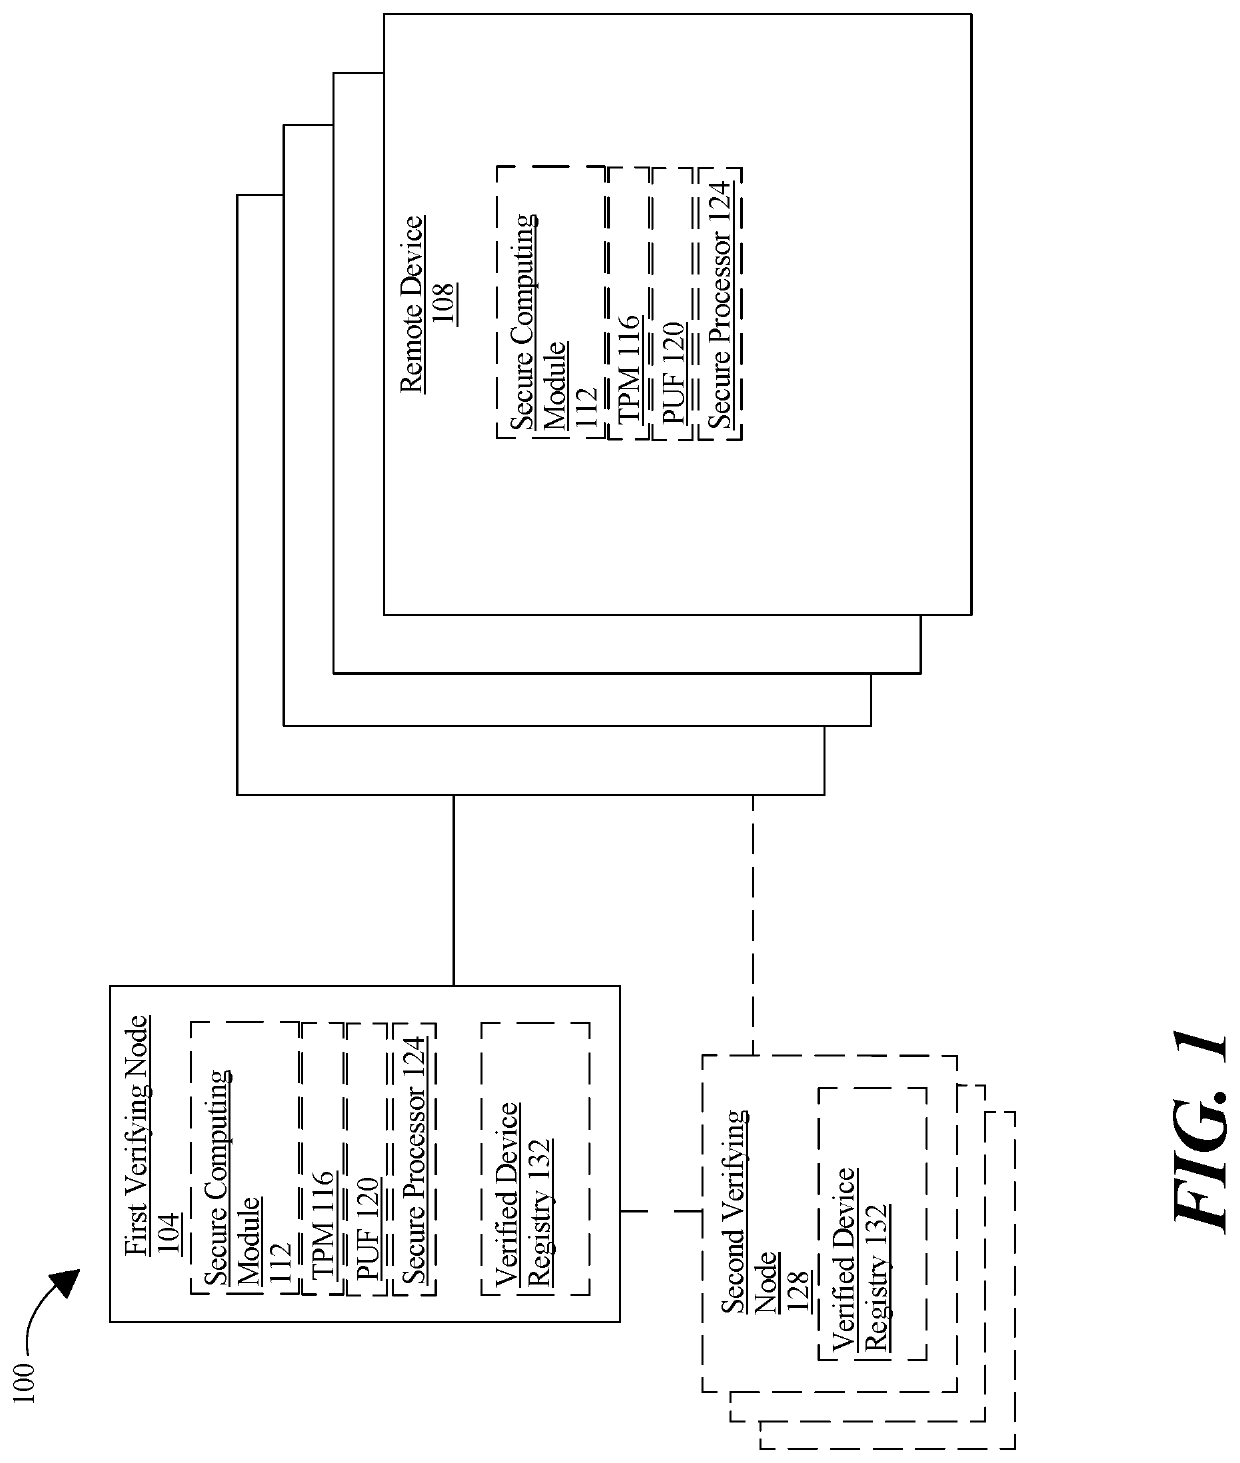 Methods and systems for a distributed certificate authority